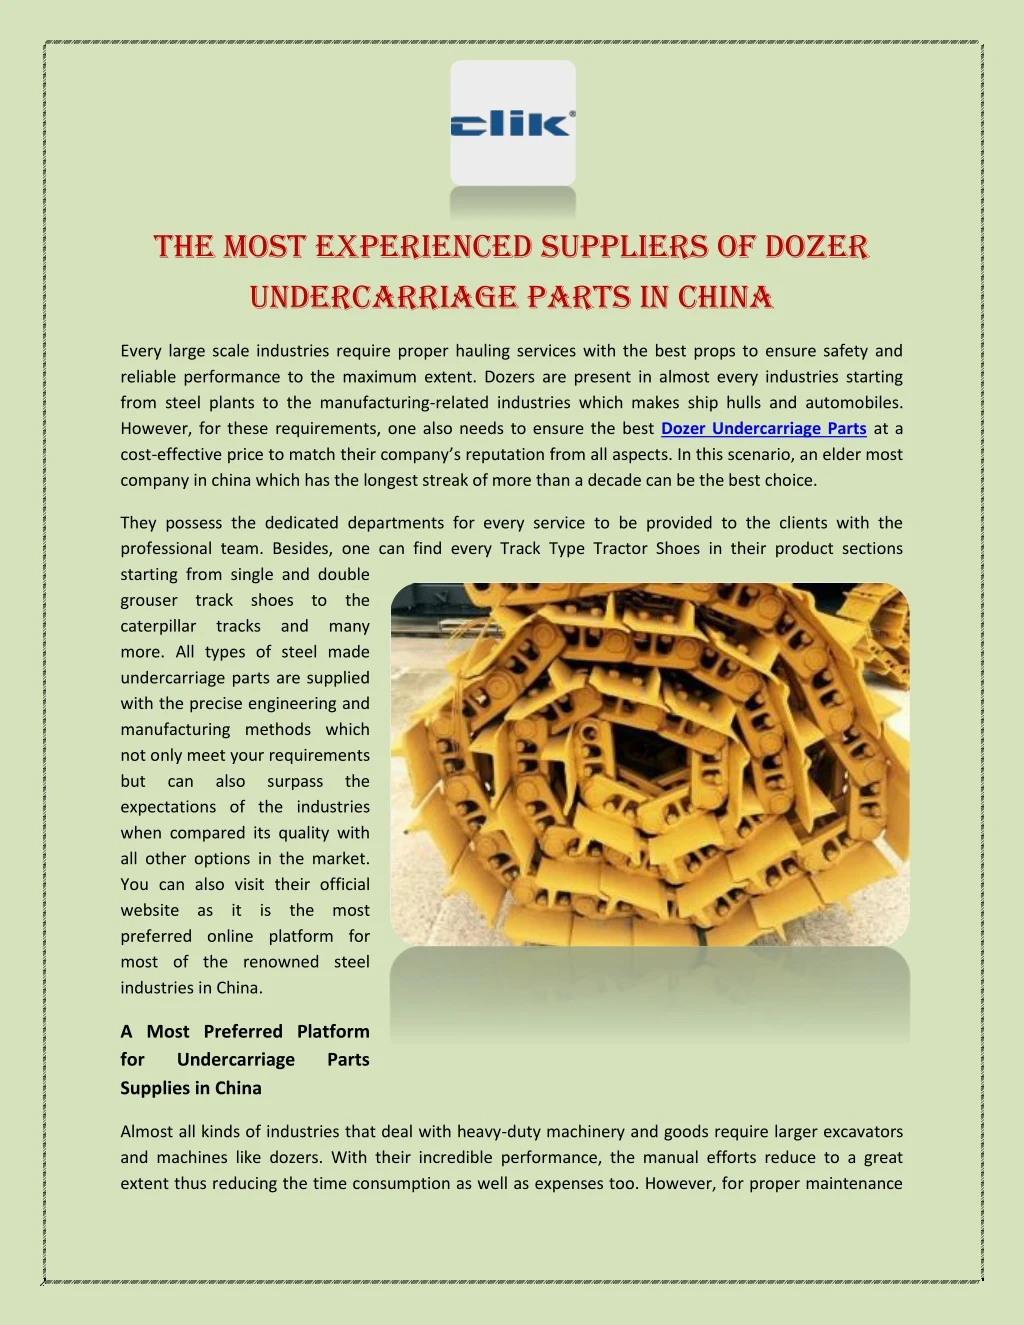 the most experienced suppliers of dozer